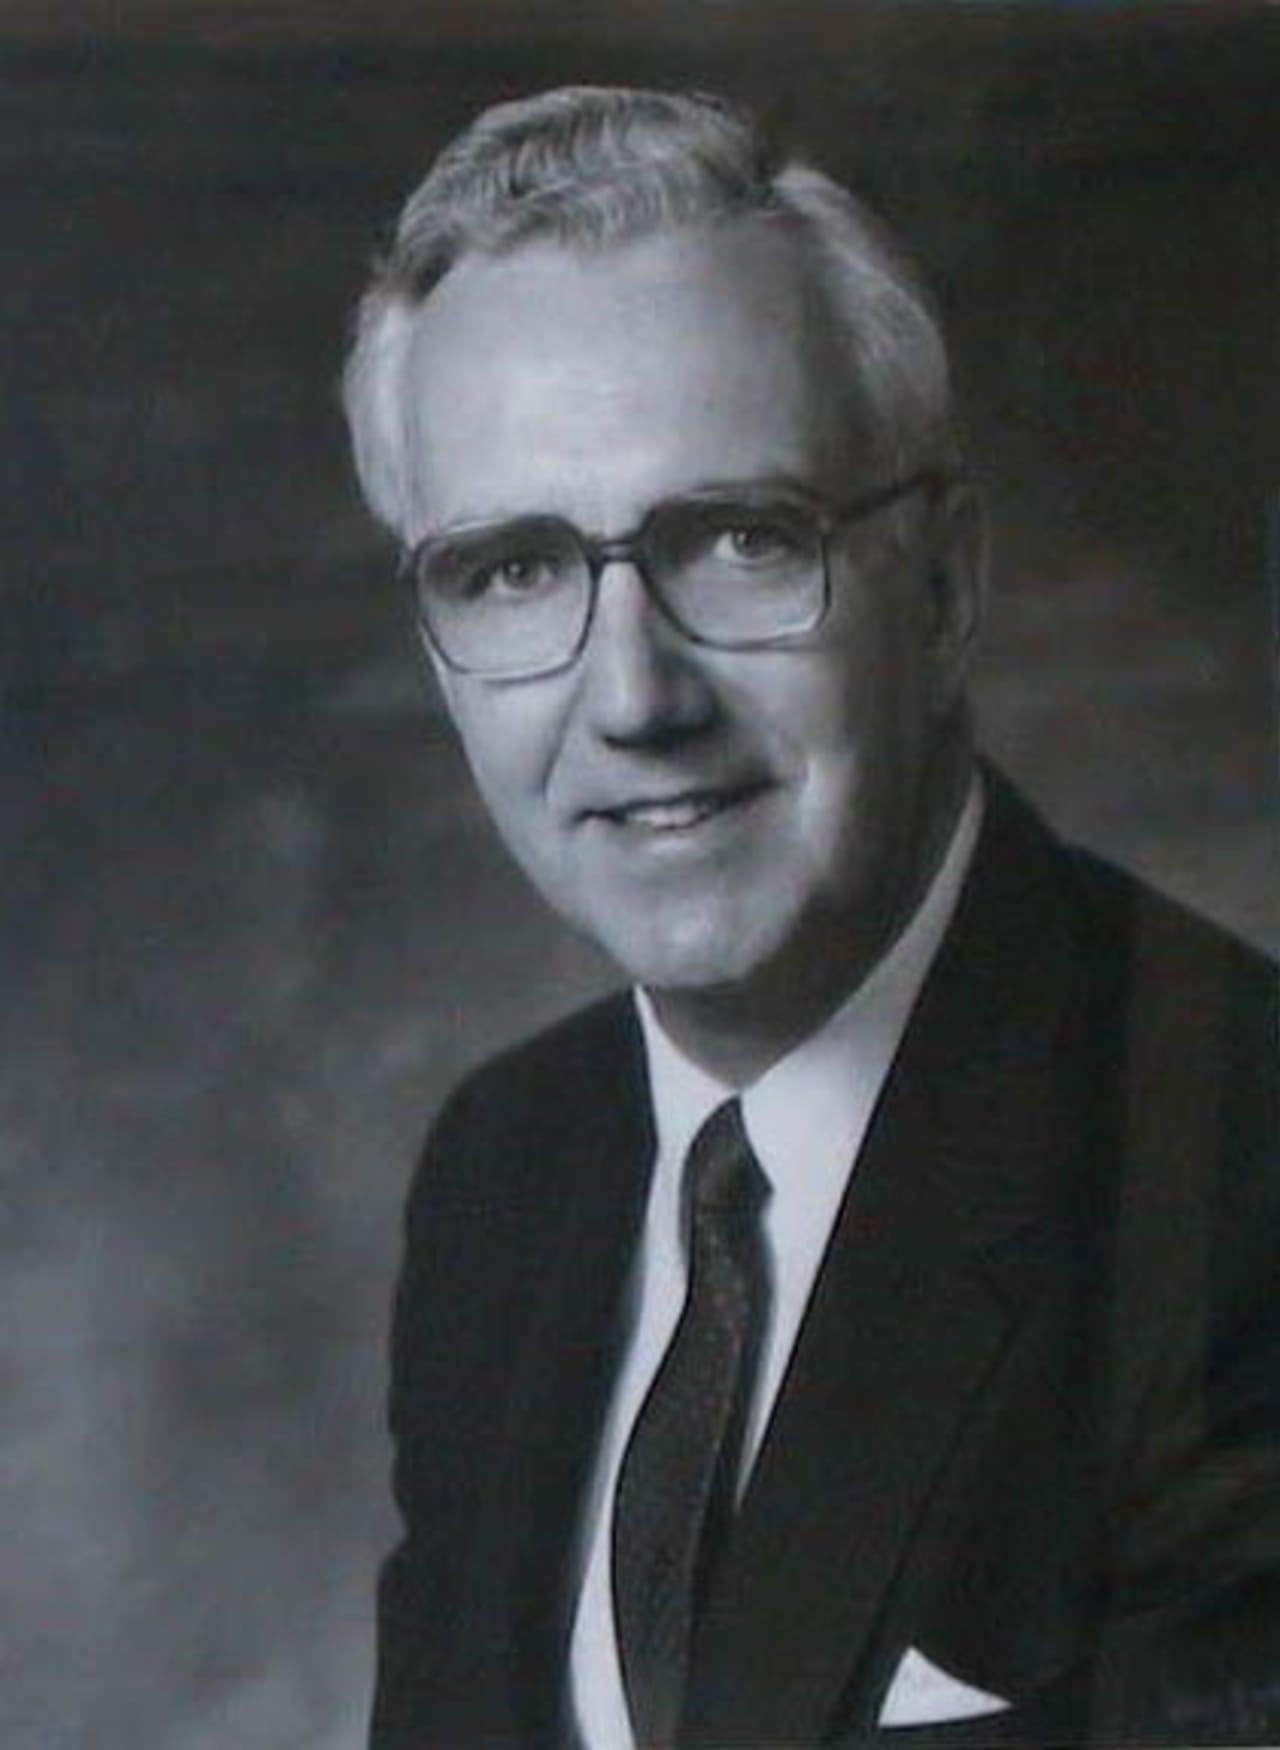 Andrew O'Rourke served as Westchester County Executive from 1983 to 1997.